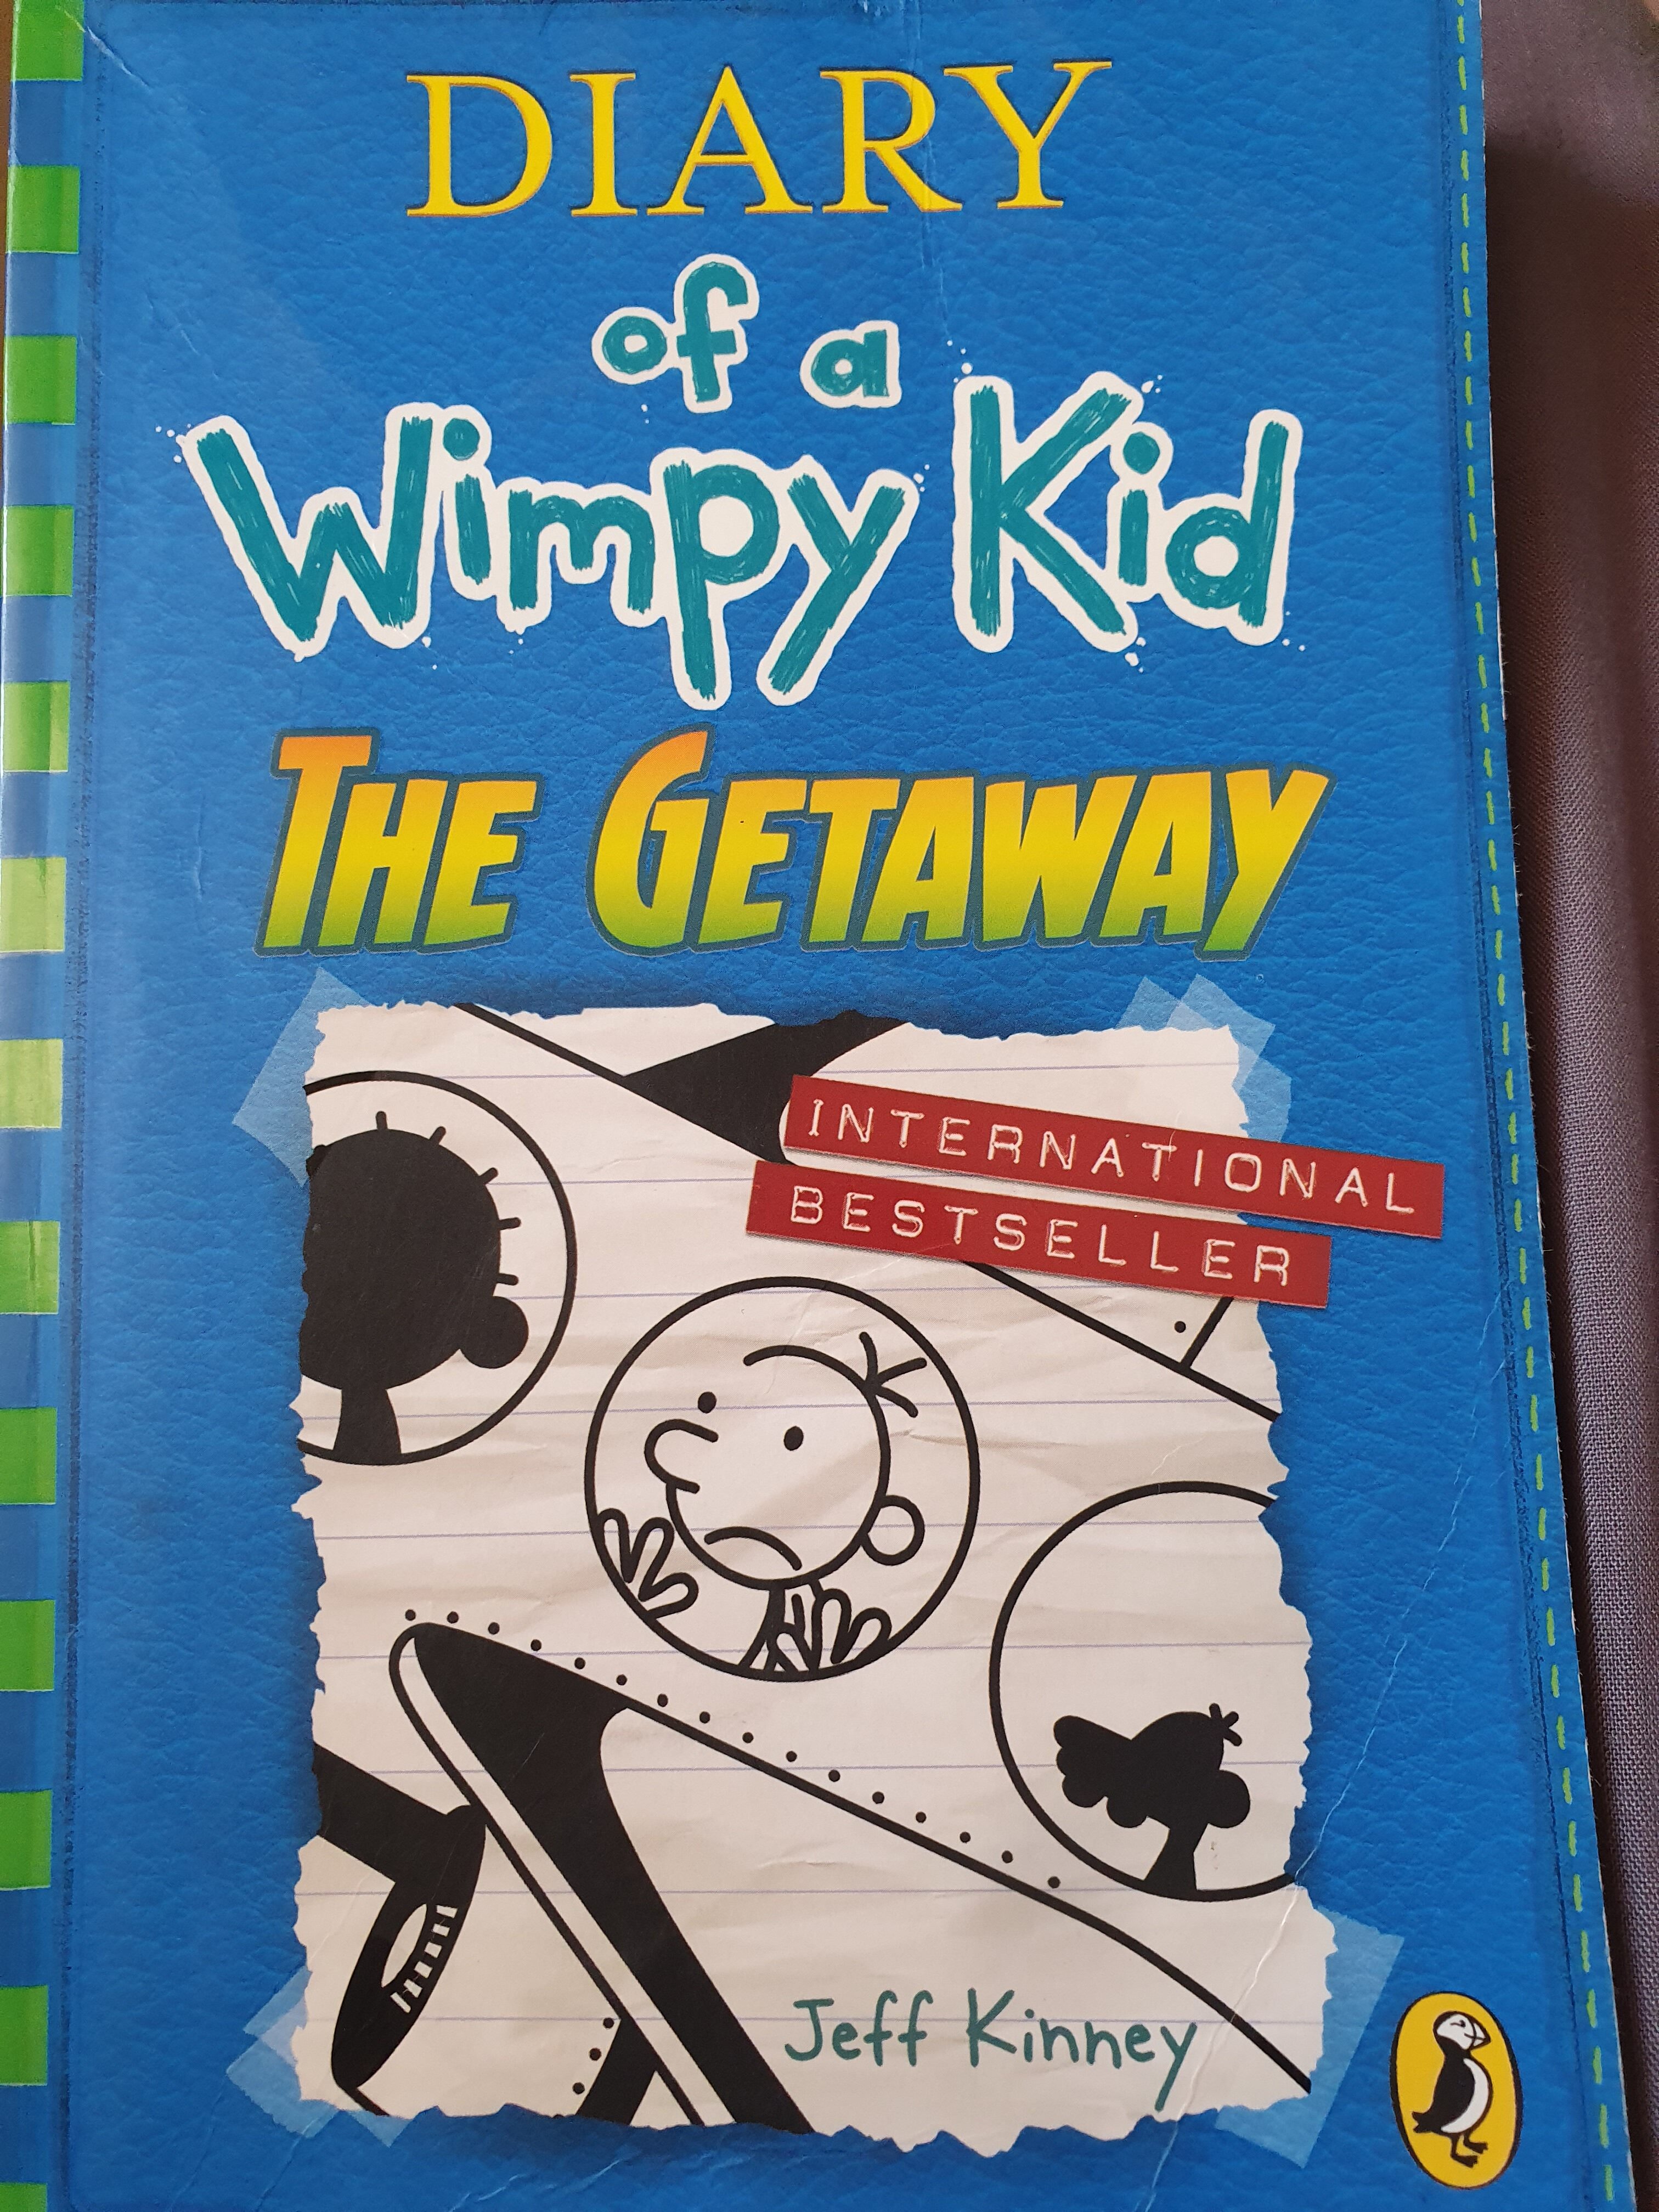 Diary of a wimpy kid The Getaway